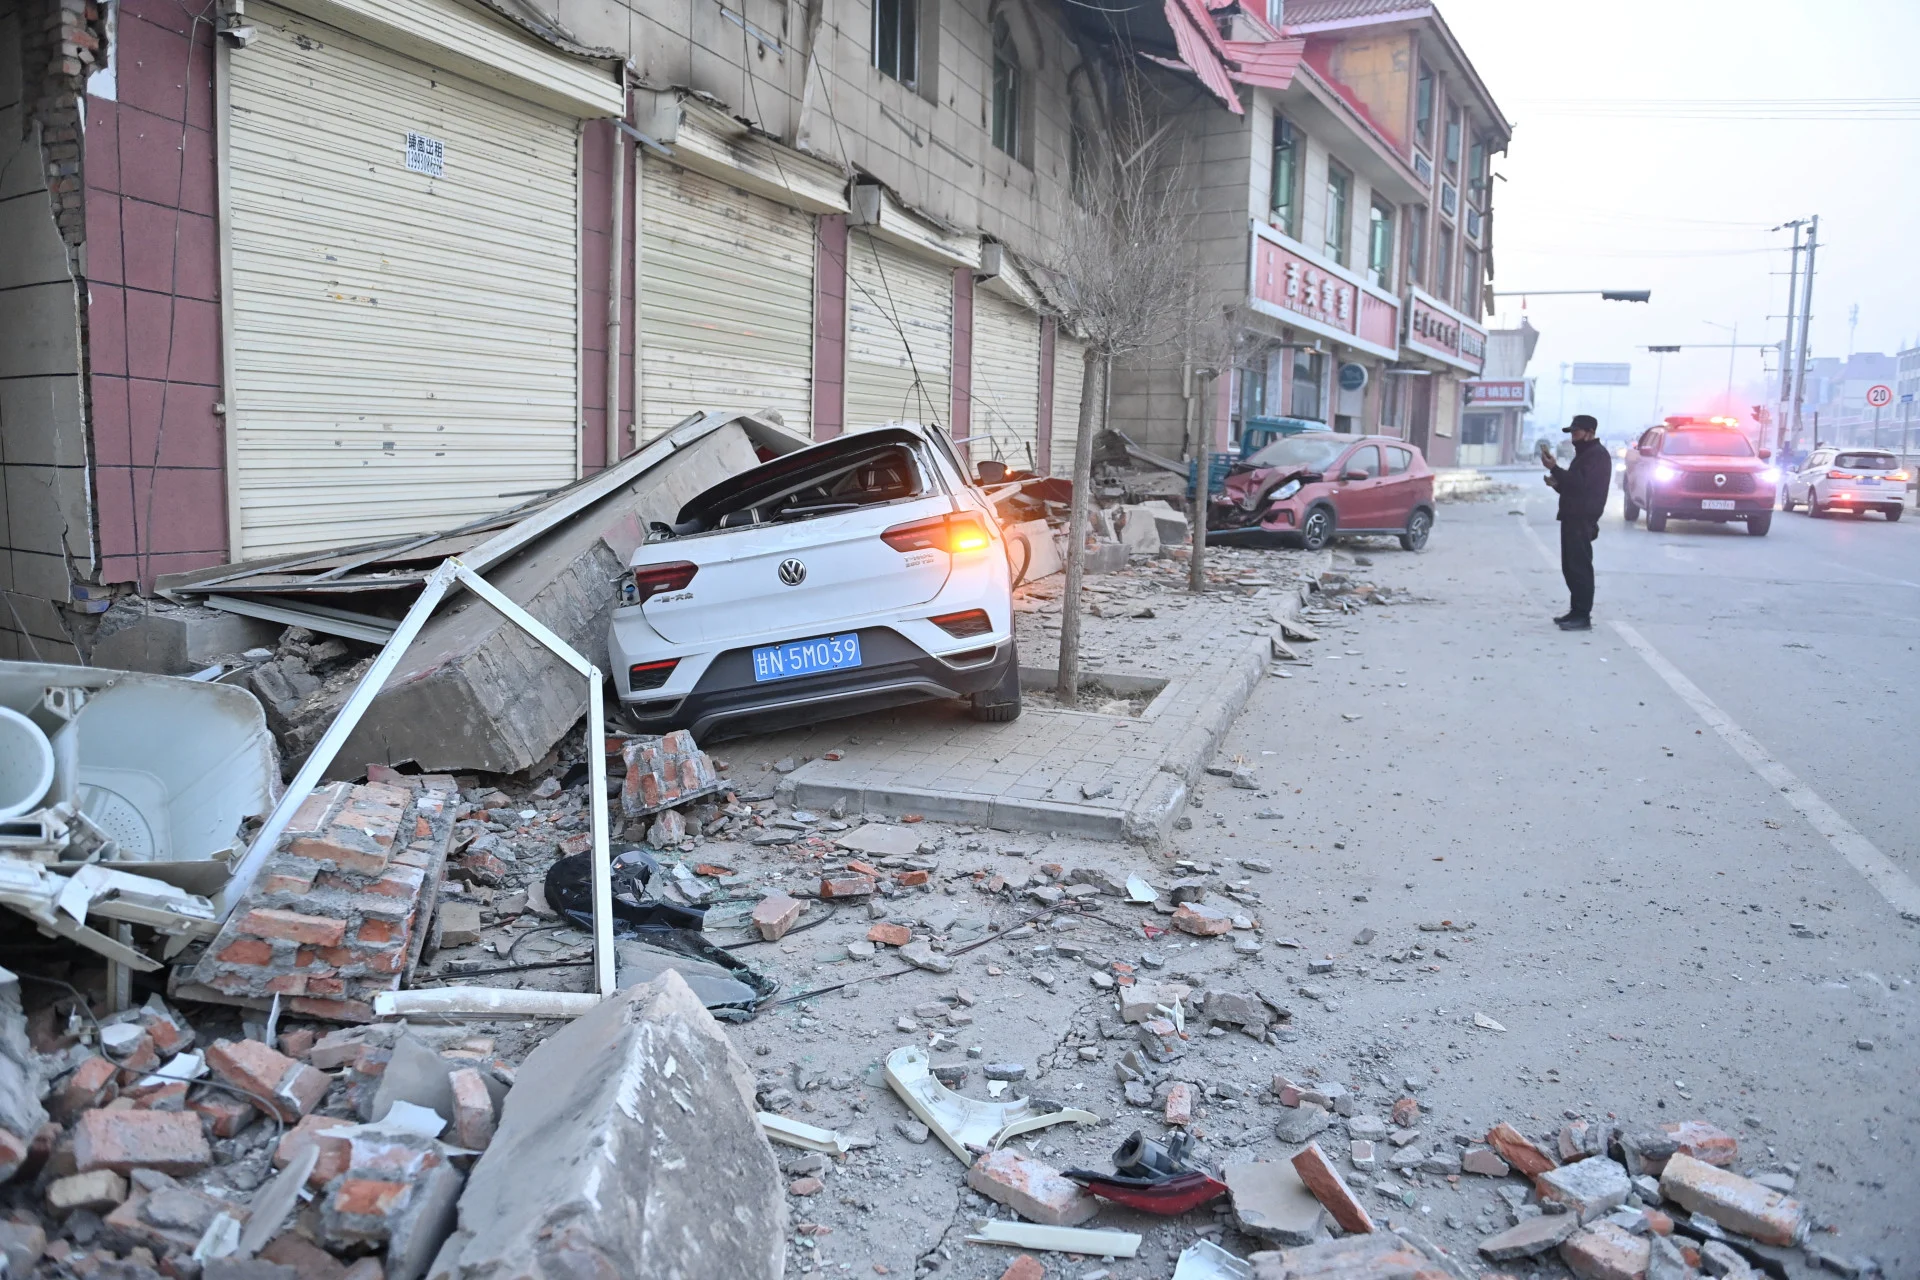 Reuters: Damaged cars are seen amid rubble next to damaged buildings at Dahejia town following the earthquake in Jishishan county, Gansu province, China December 19, 2023. cnsphoto via REUTERS